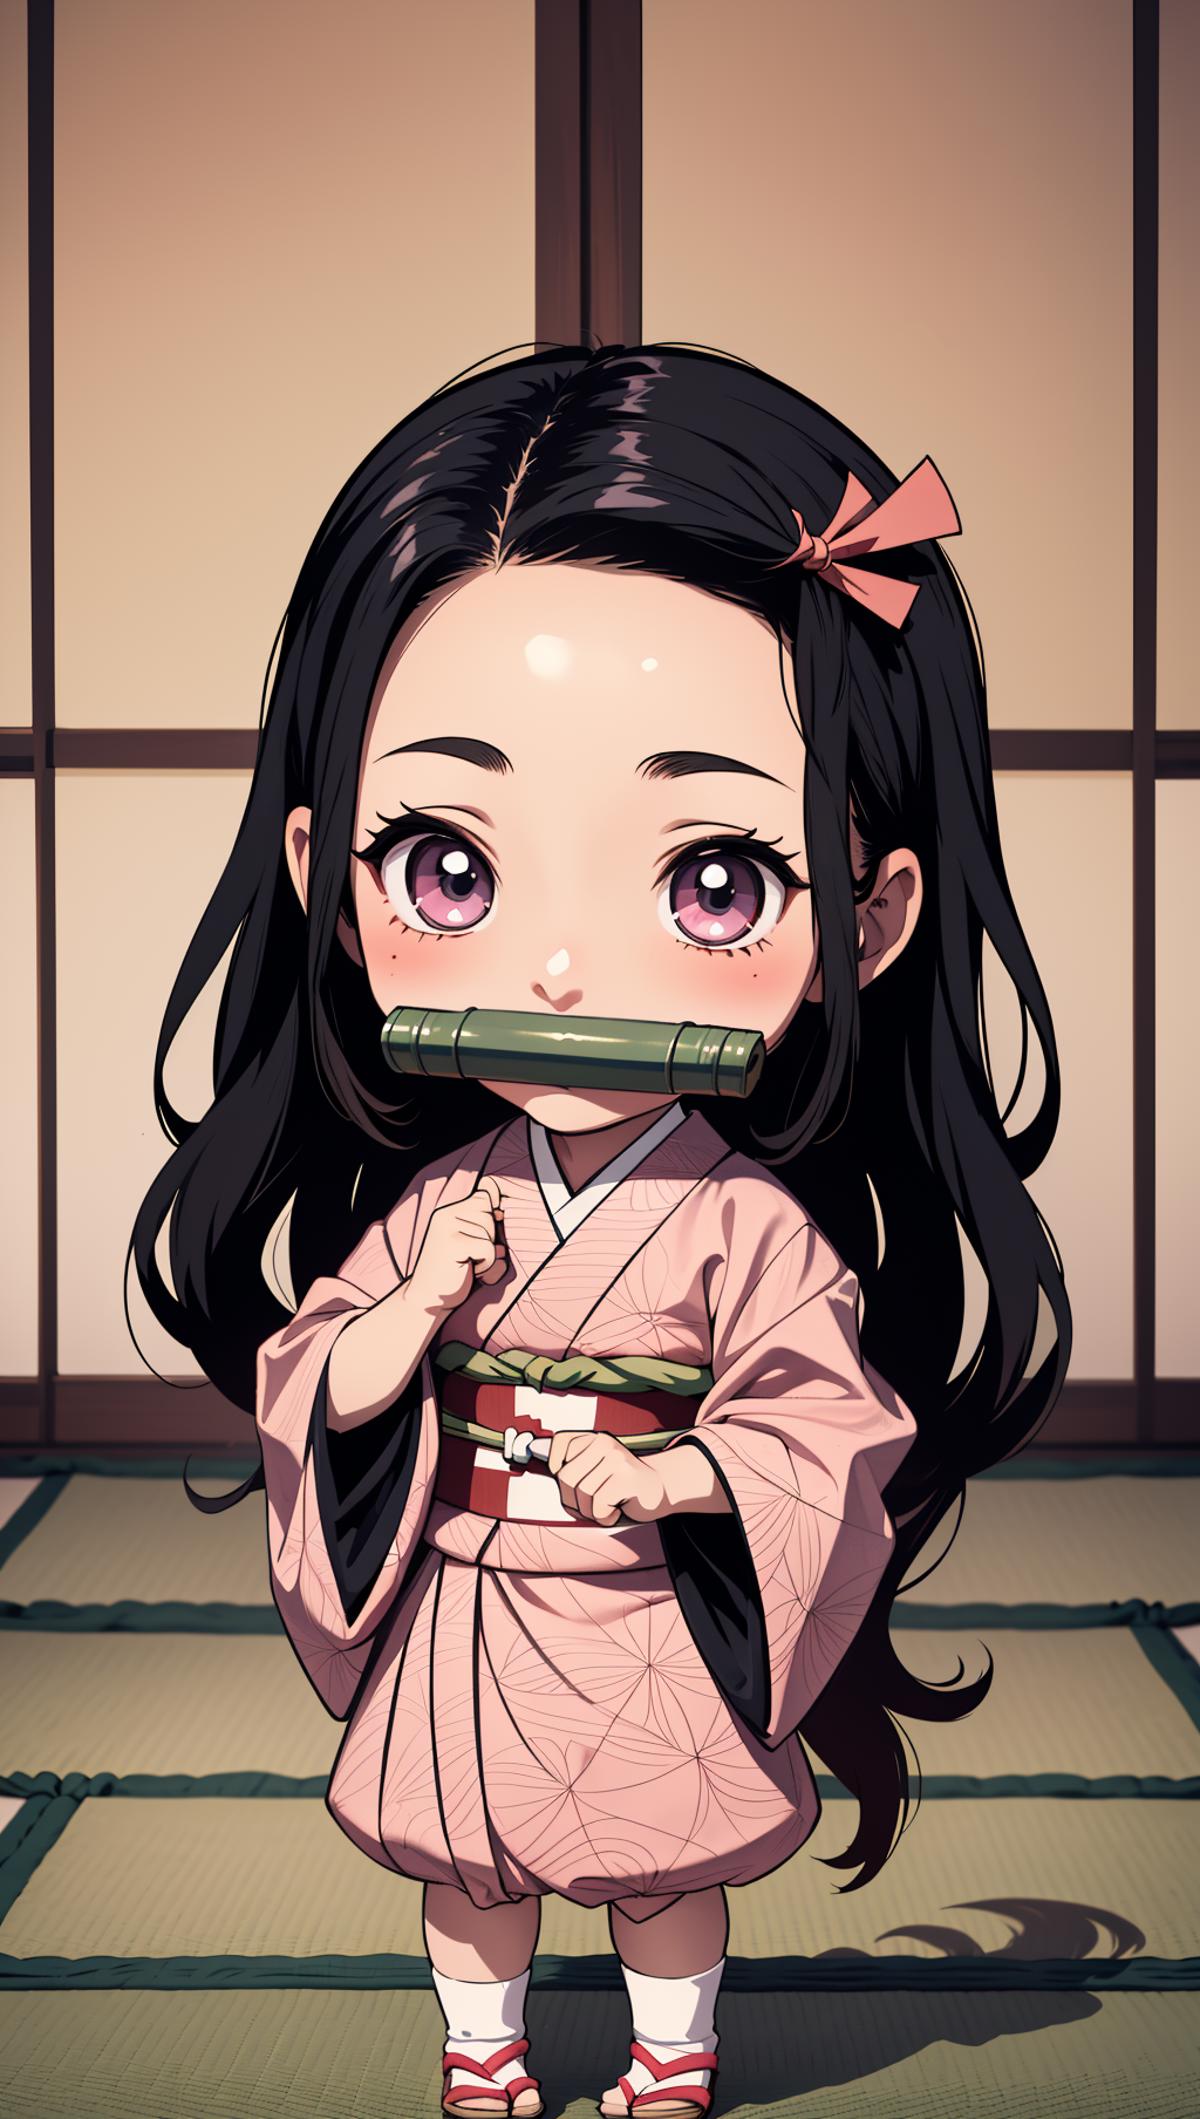 A young girl with long black hair and a pink bow in her hair is wearing a pink kimono and holding a green bamboo stick.